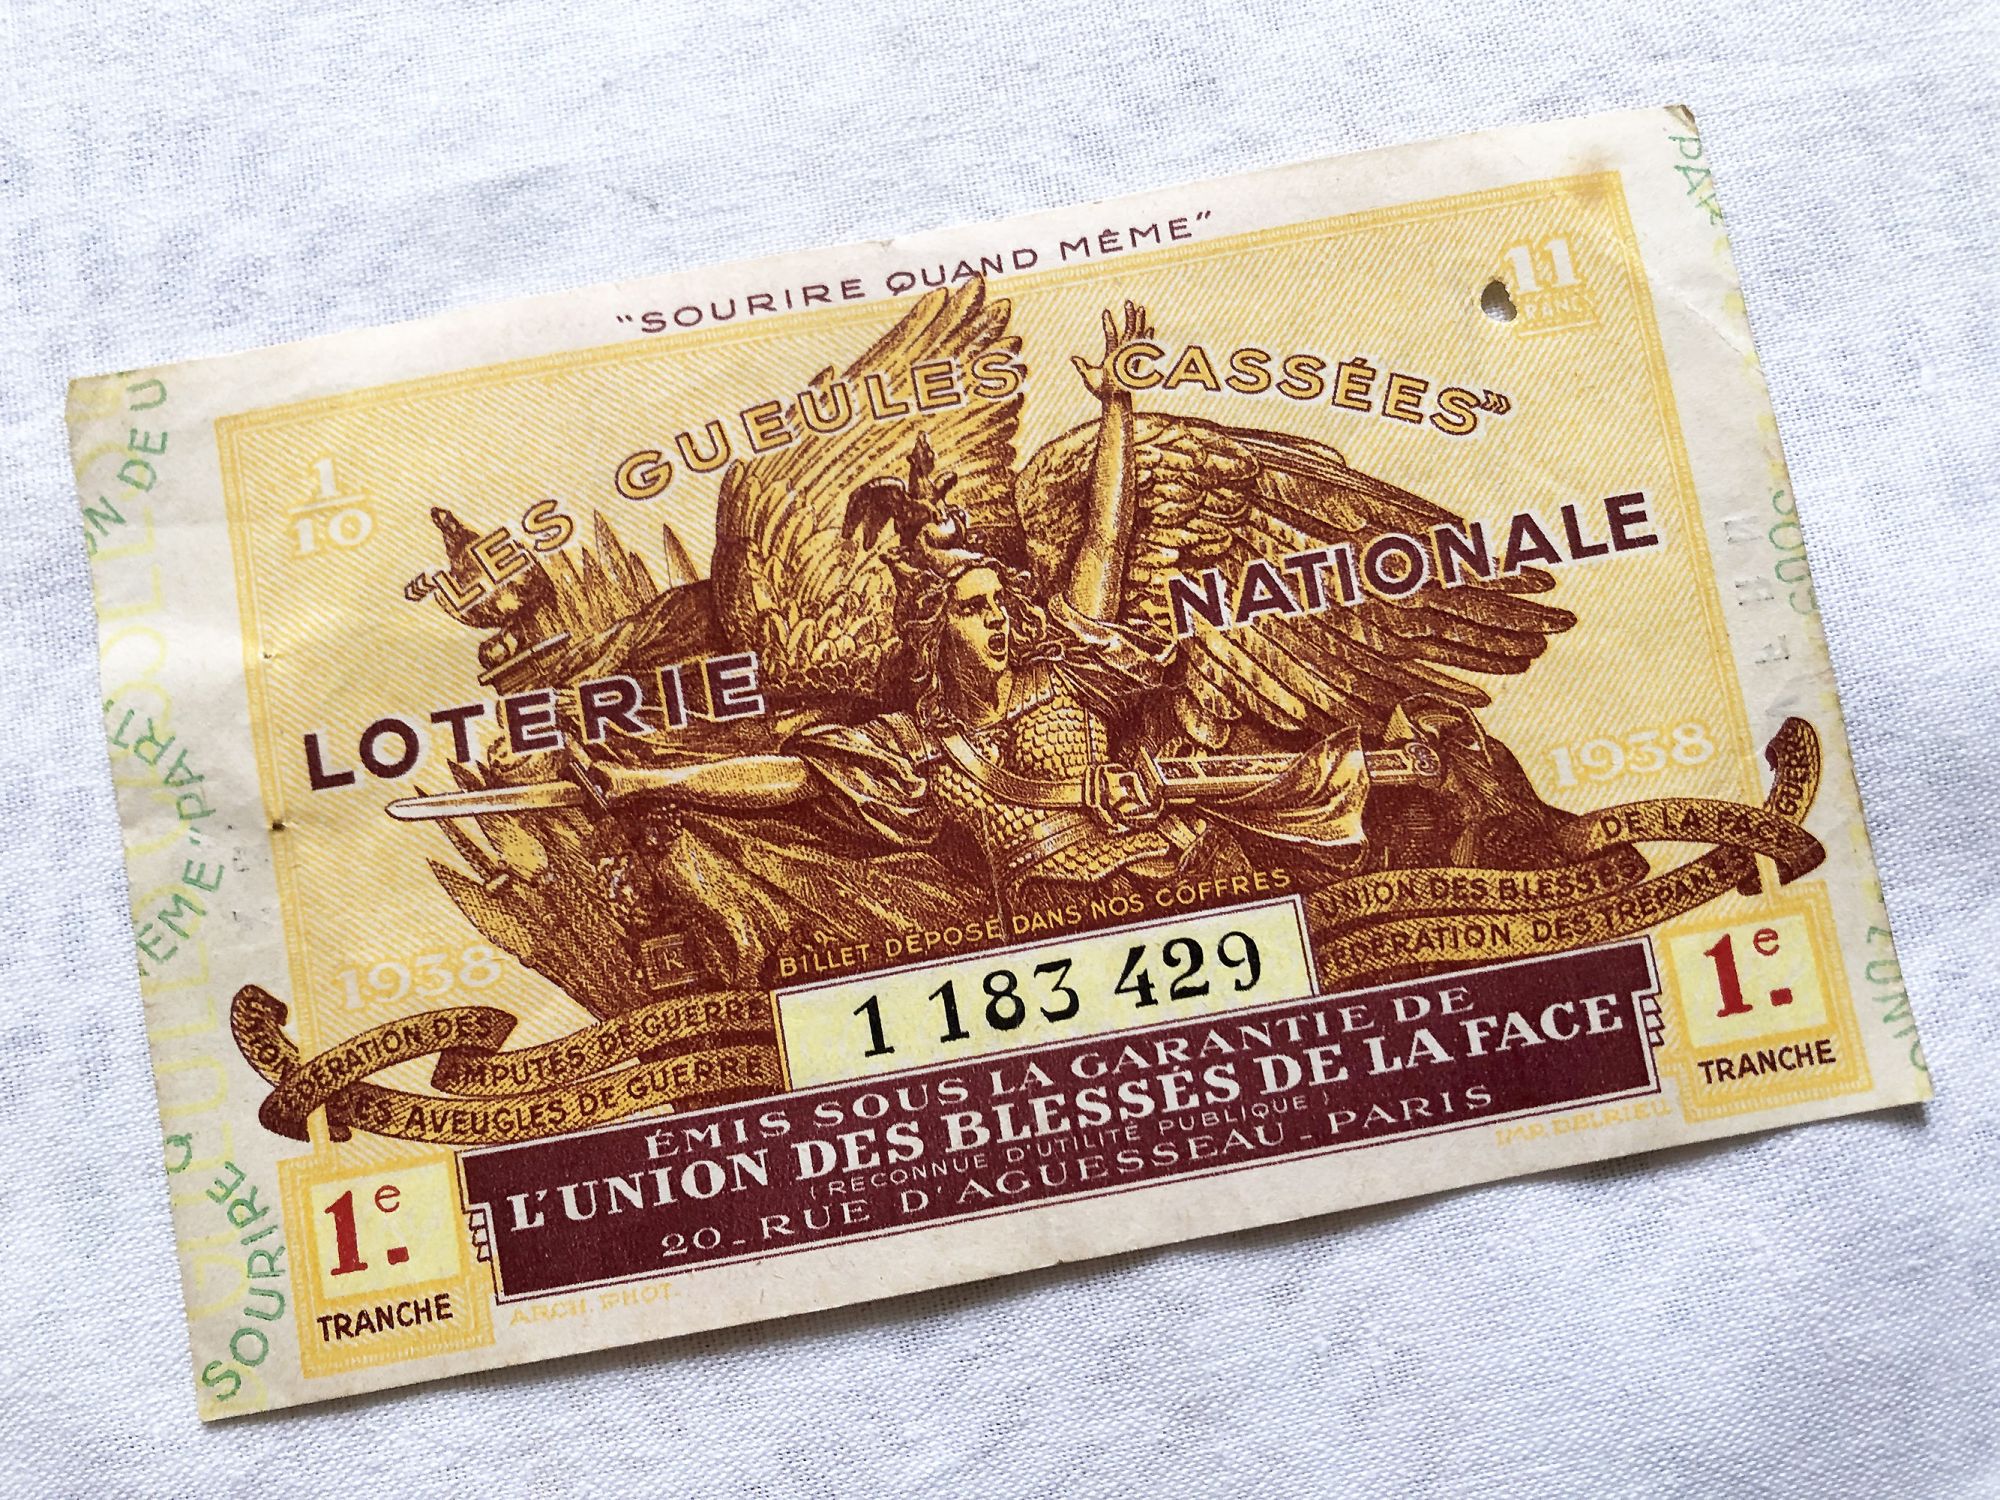 Huge French lottery tickets "Les gueules cassées" from 1938